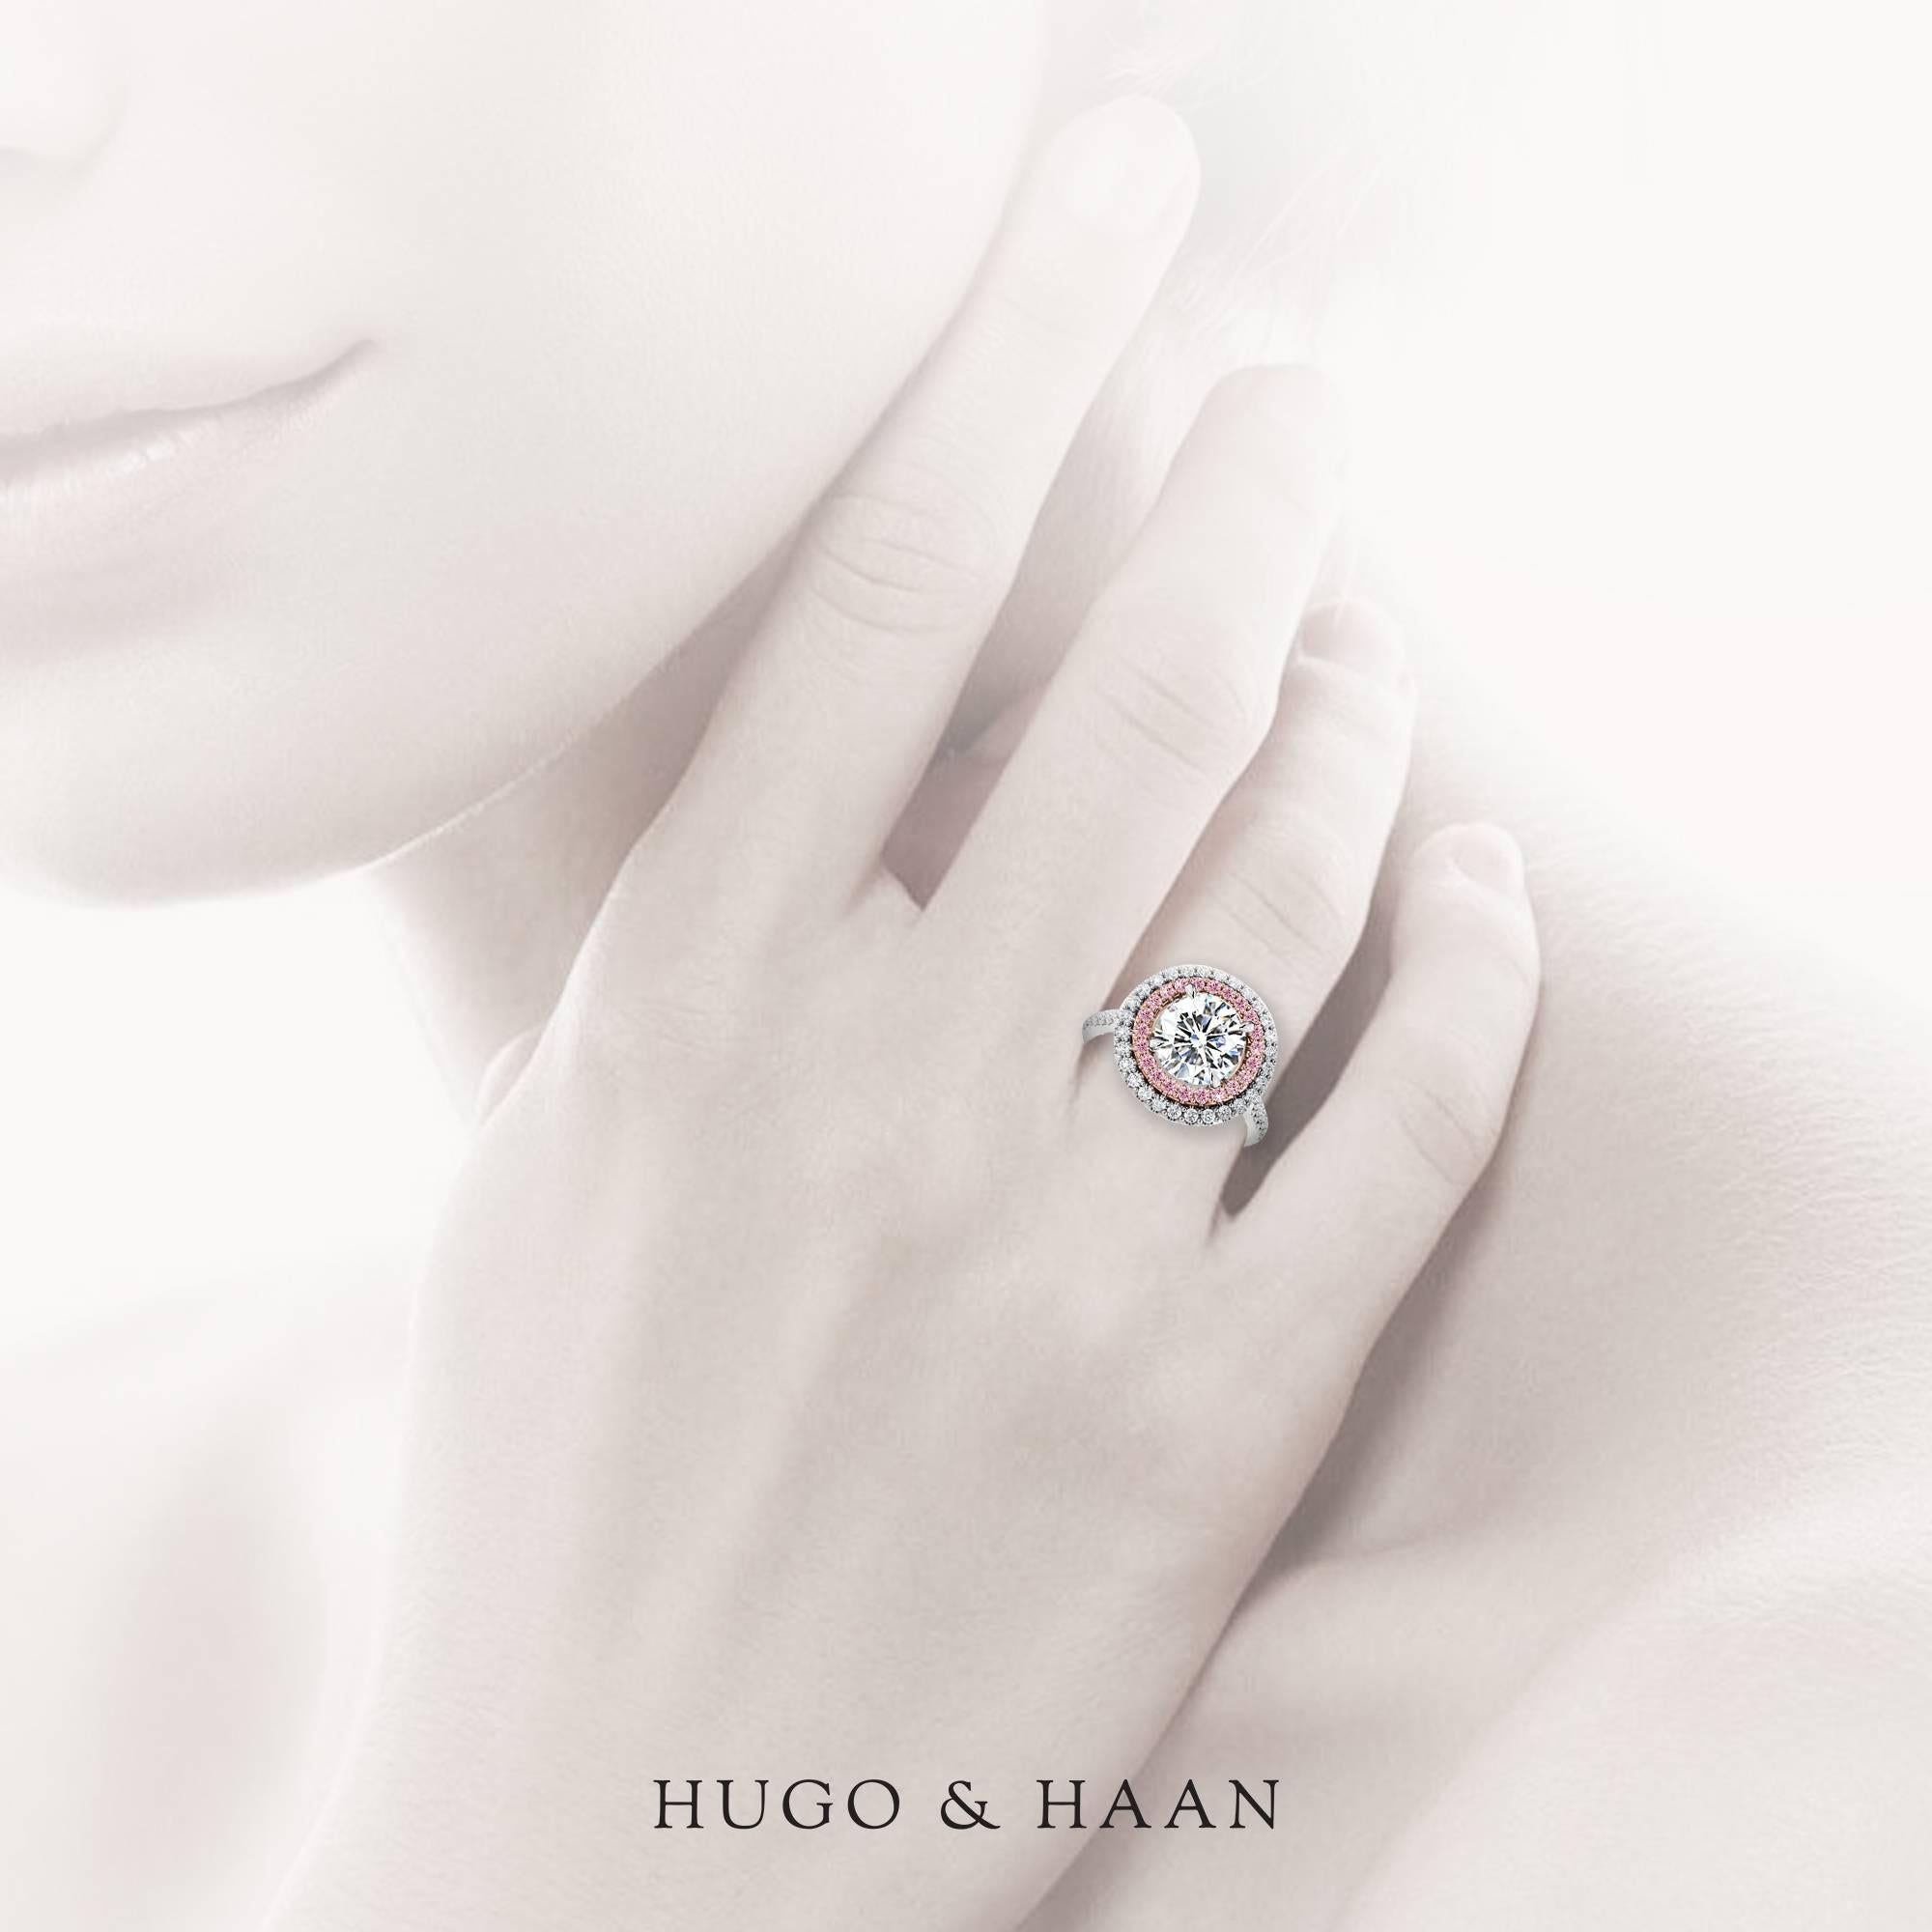 Hugo & Haan Platinum Gold Brilliant Diamond Pink Sapphire Engagement Ring In New Condition For Sale In London, GB